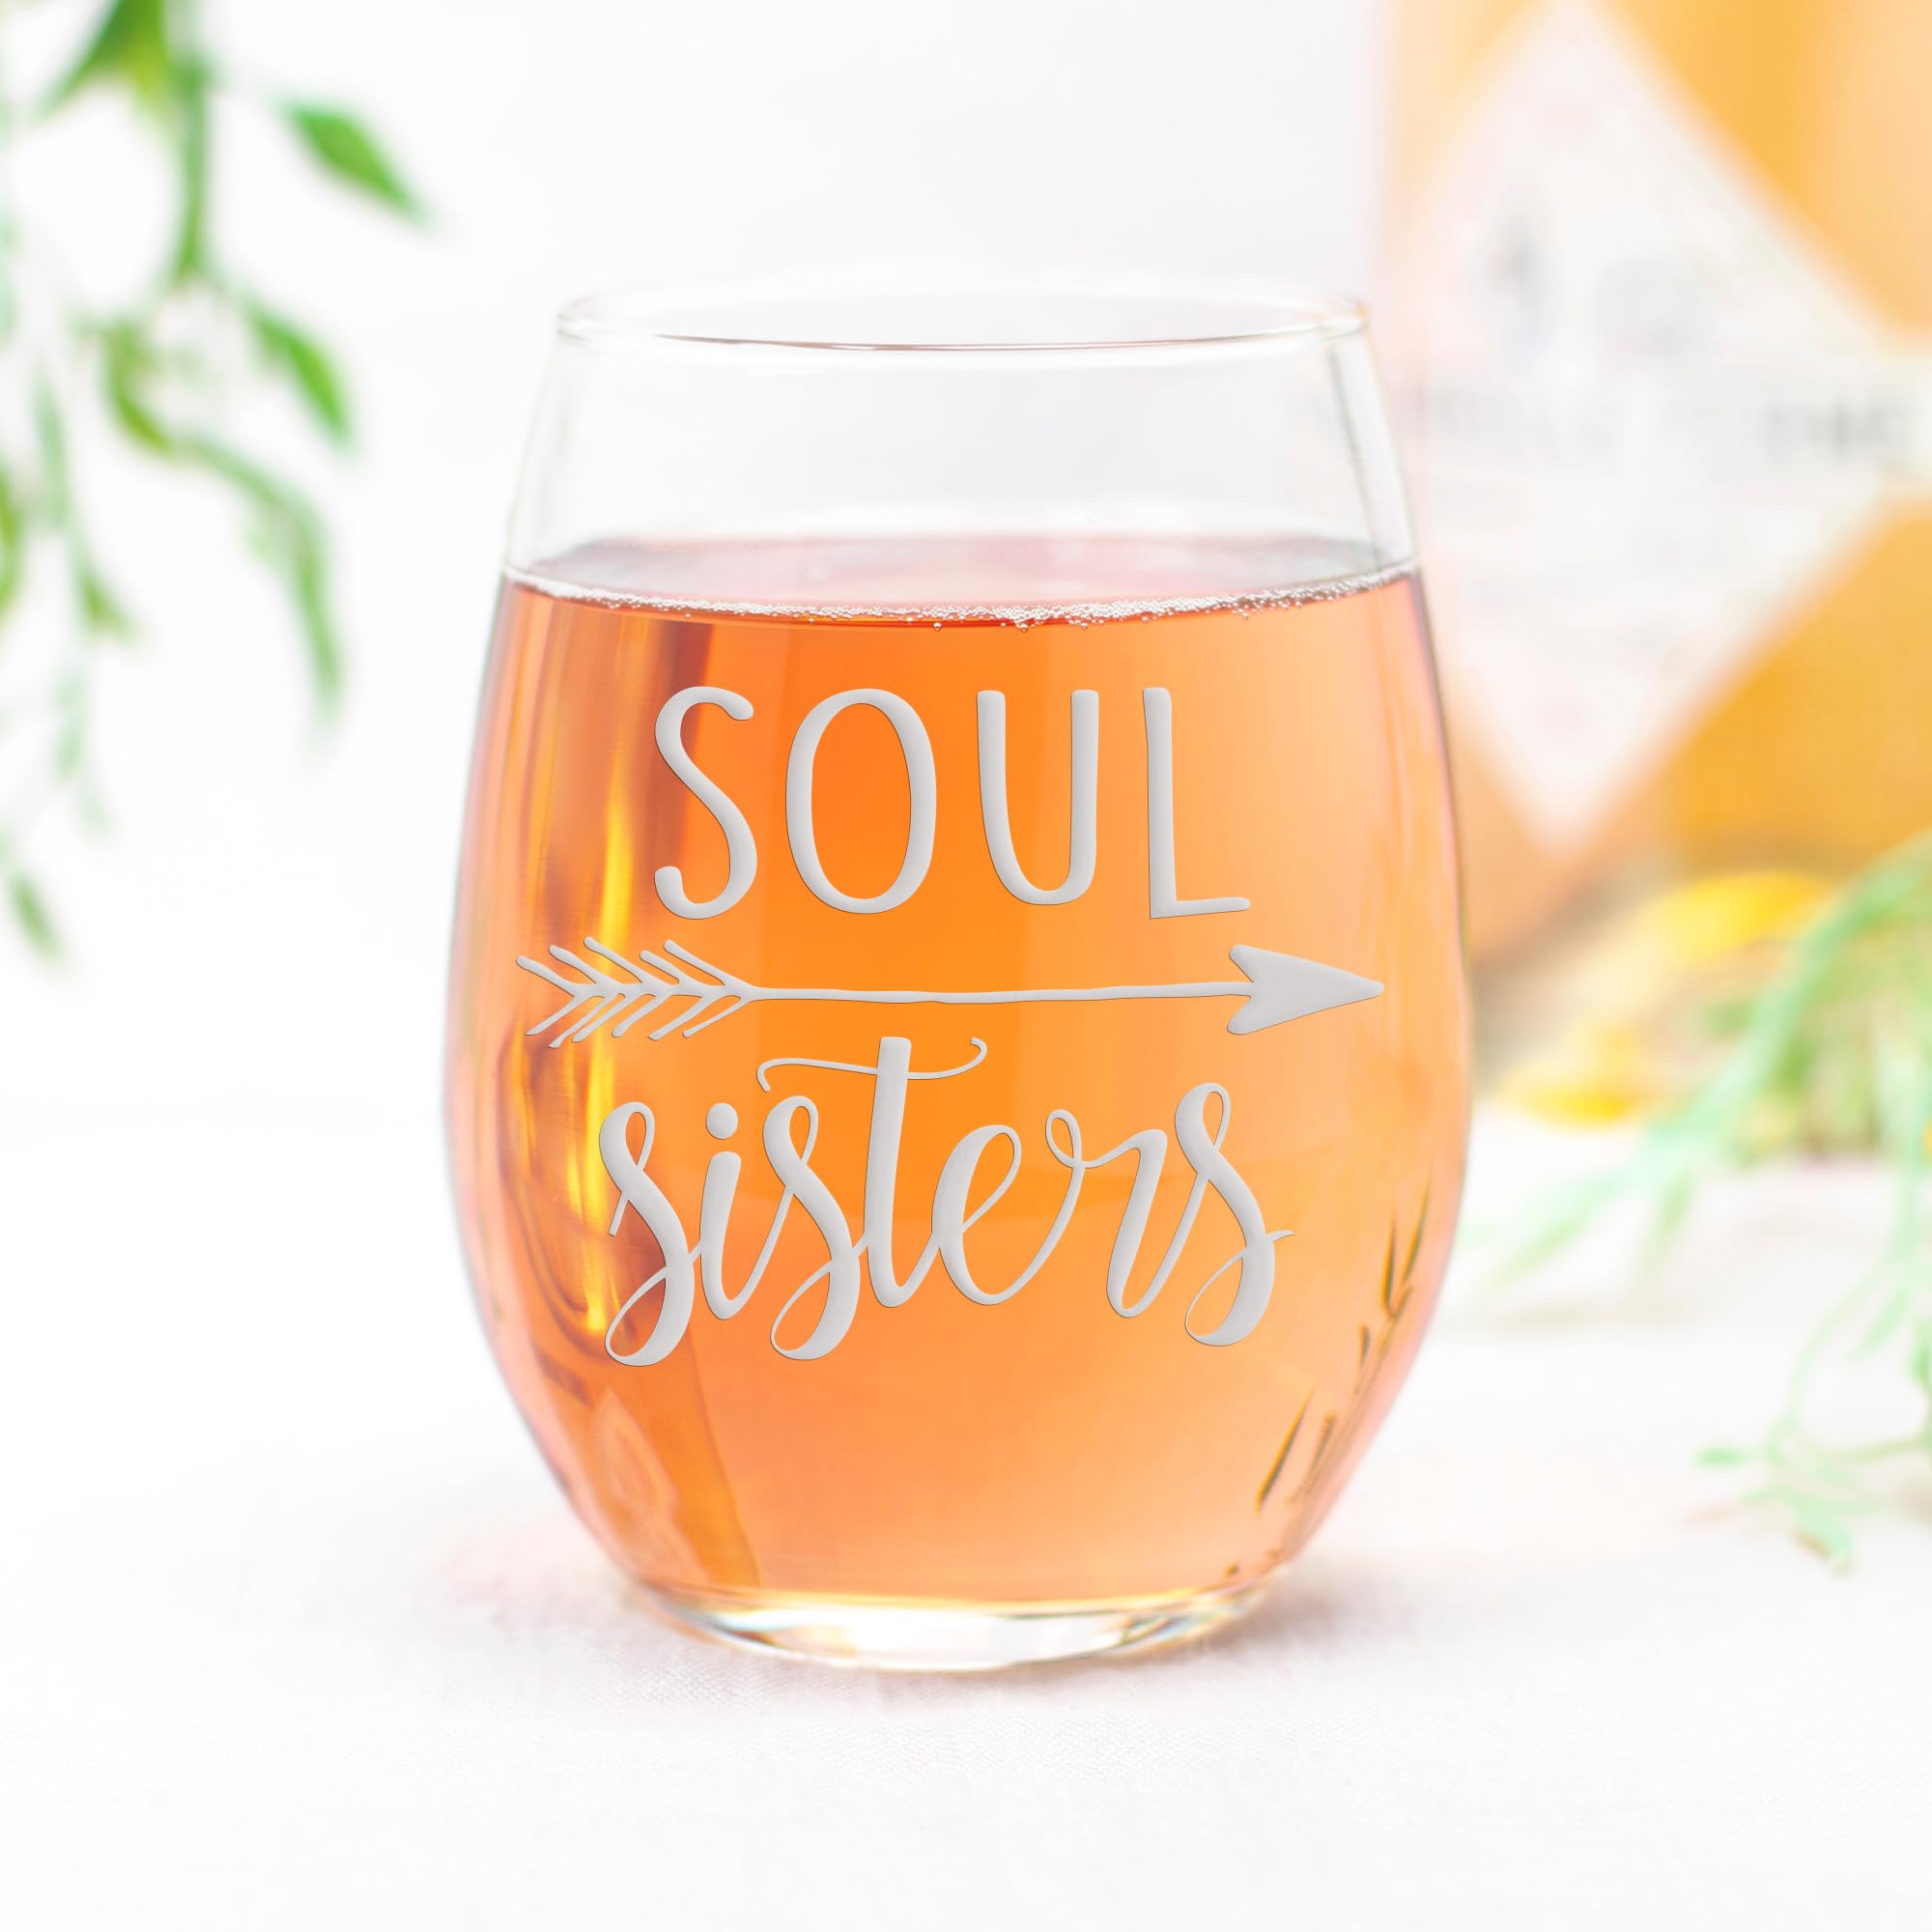 Soul Sisters With Arrows Stemless Wine Glass - Sisters Gift, Friend Gift, Girlfriends Gift, Arrow Gift, Sisters Wine Glass